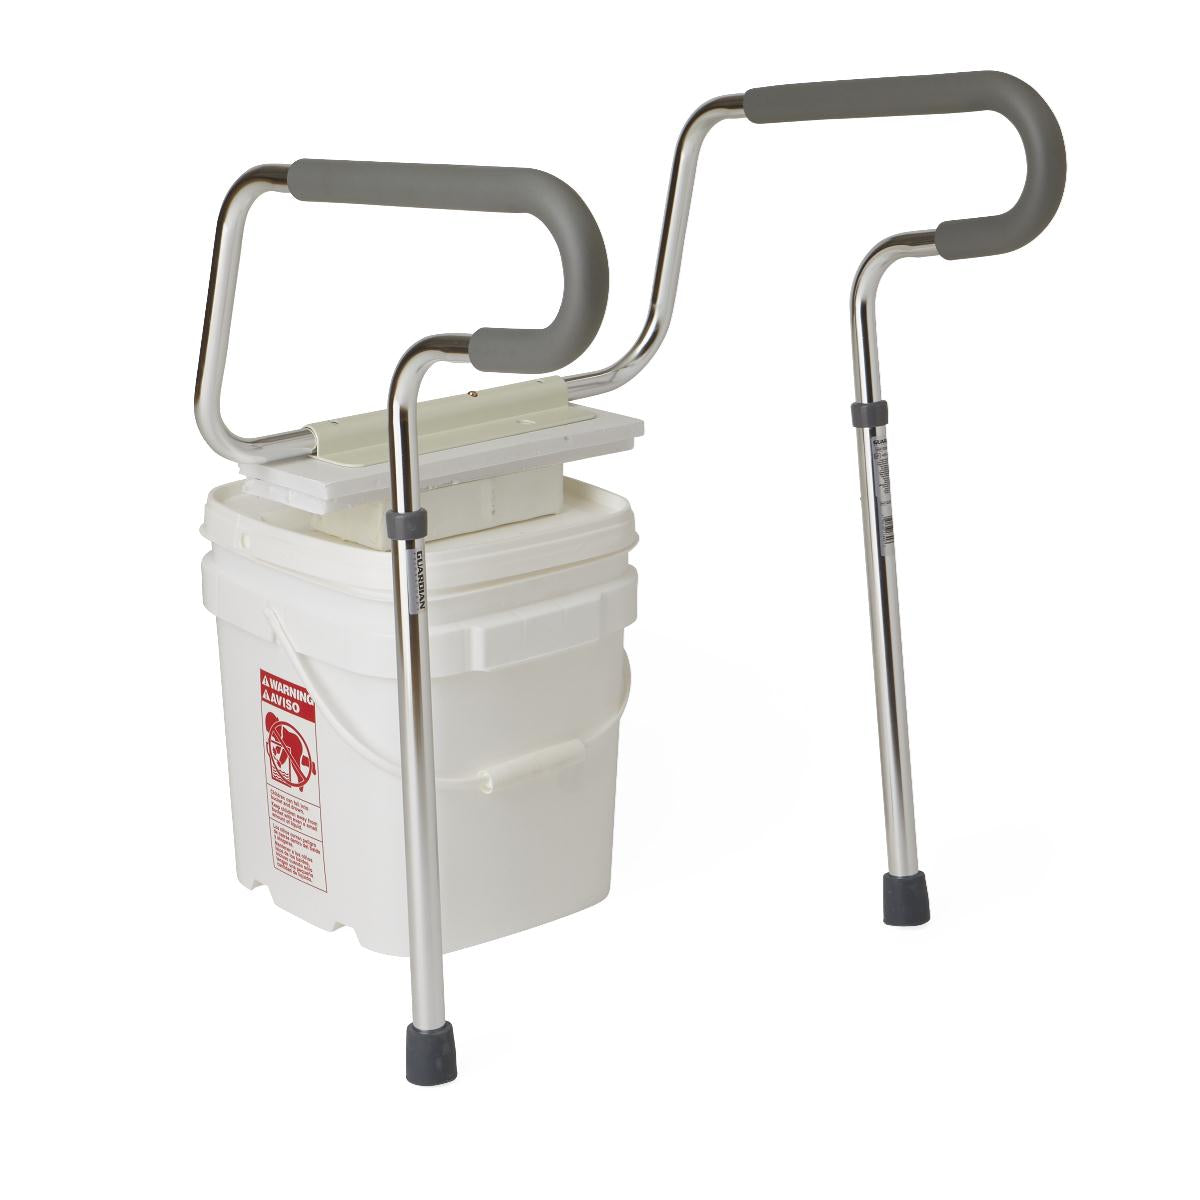 Rental Toilet Safety Frame with Padded Arms